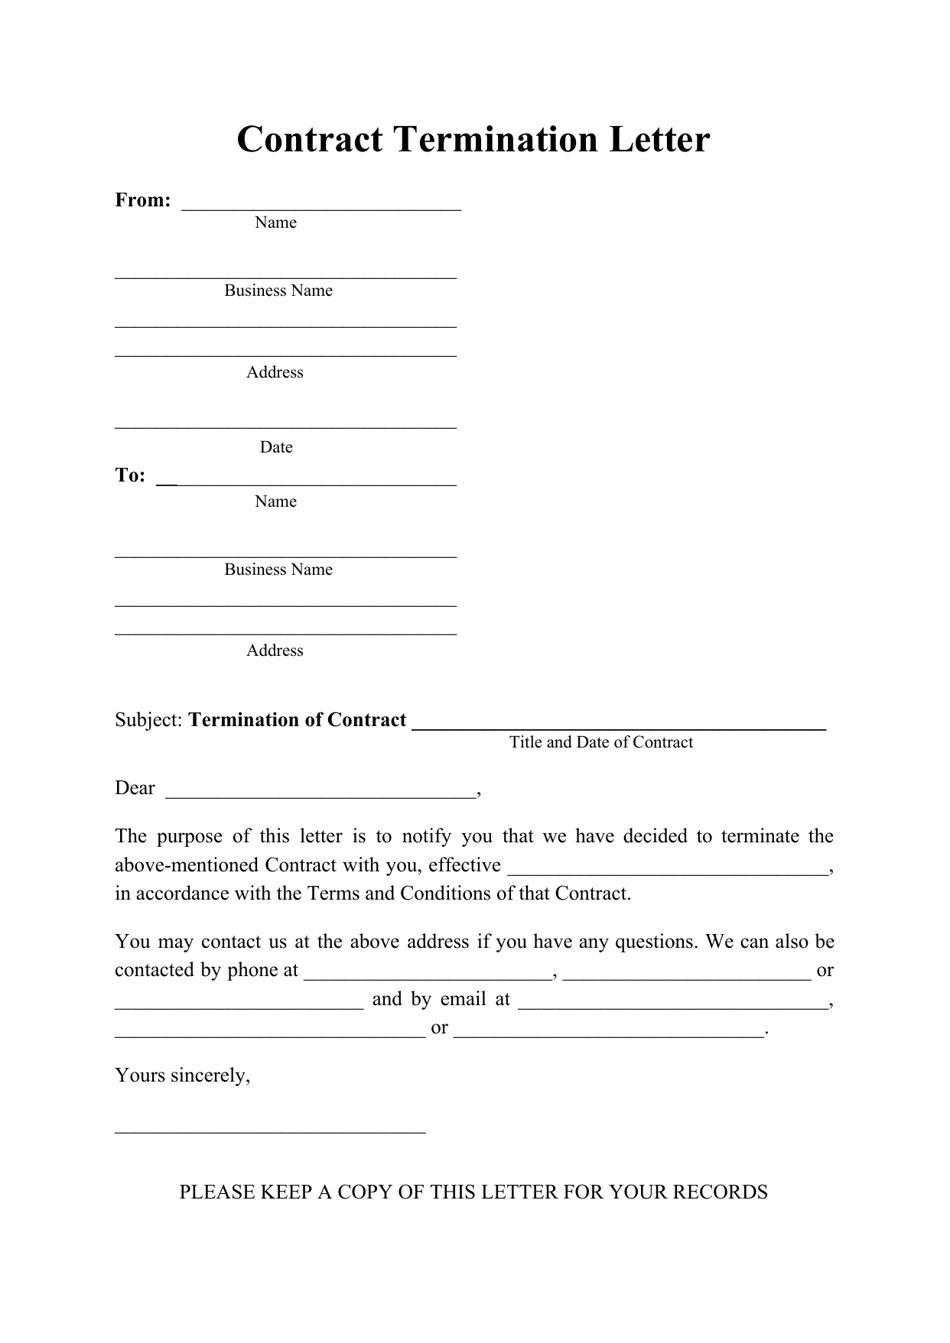 Contract Termination Letter Template, Page 1